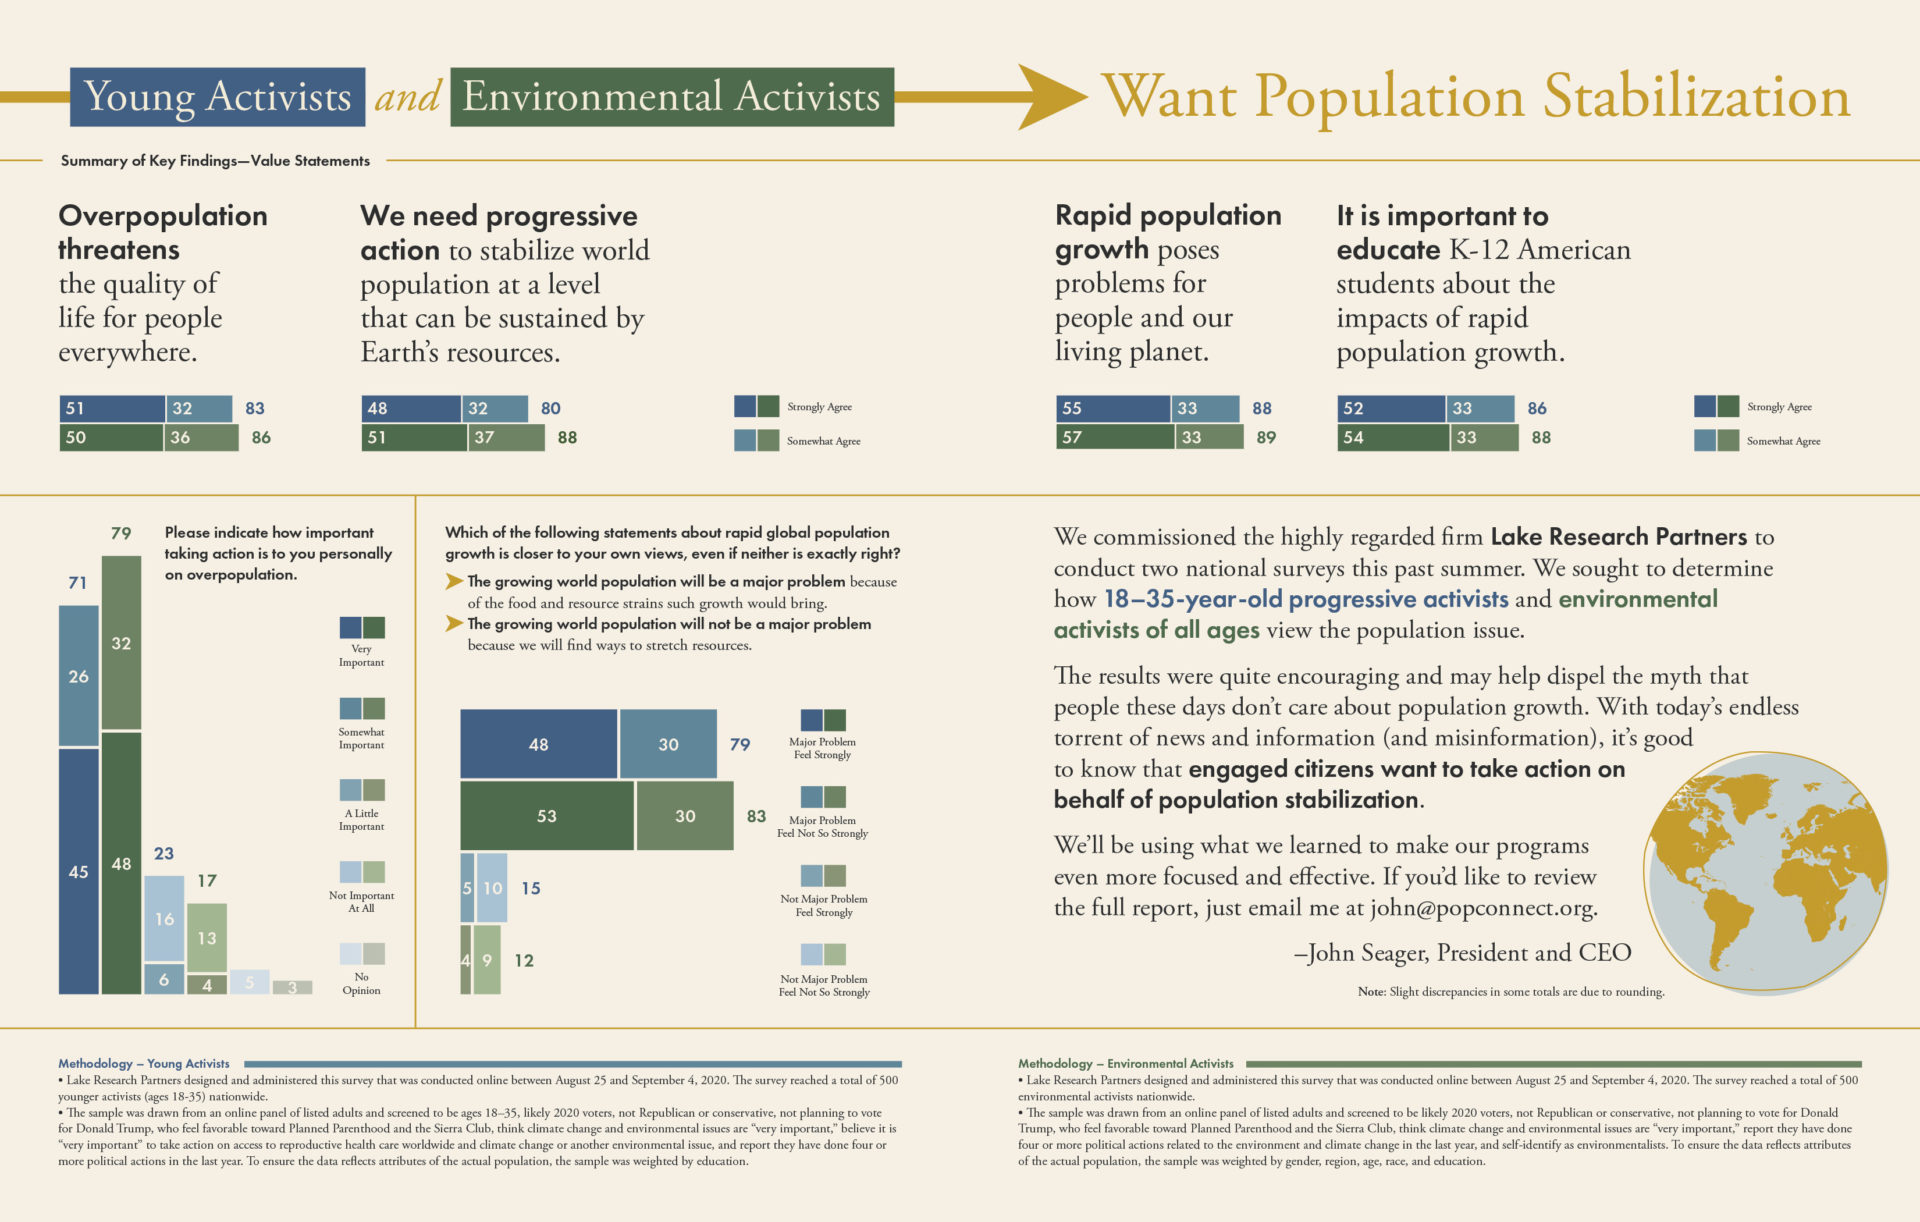 infographic illustrating how young activists and environmental activists want population stabilization. Over 80% of both groups strongly agree or somewhat agree that 